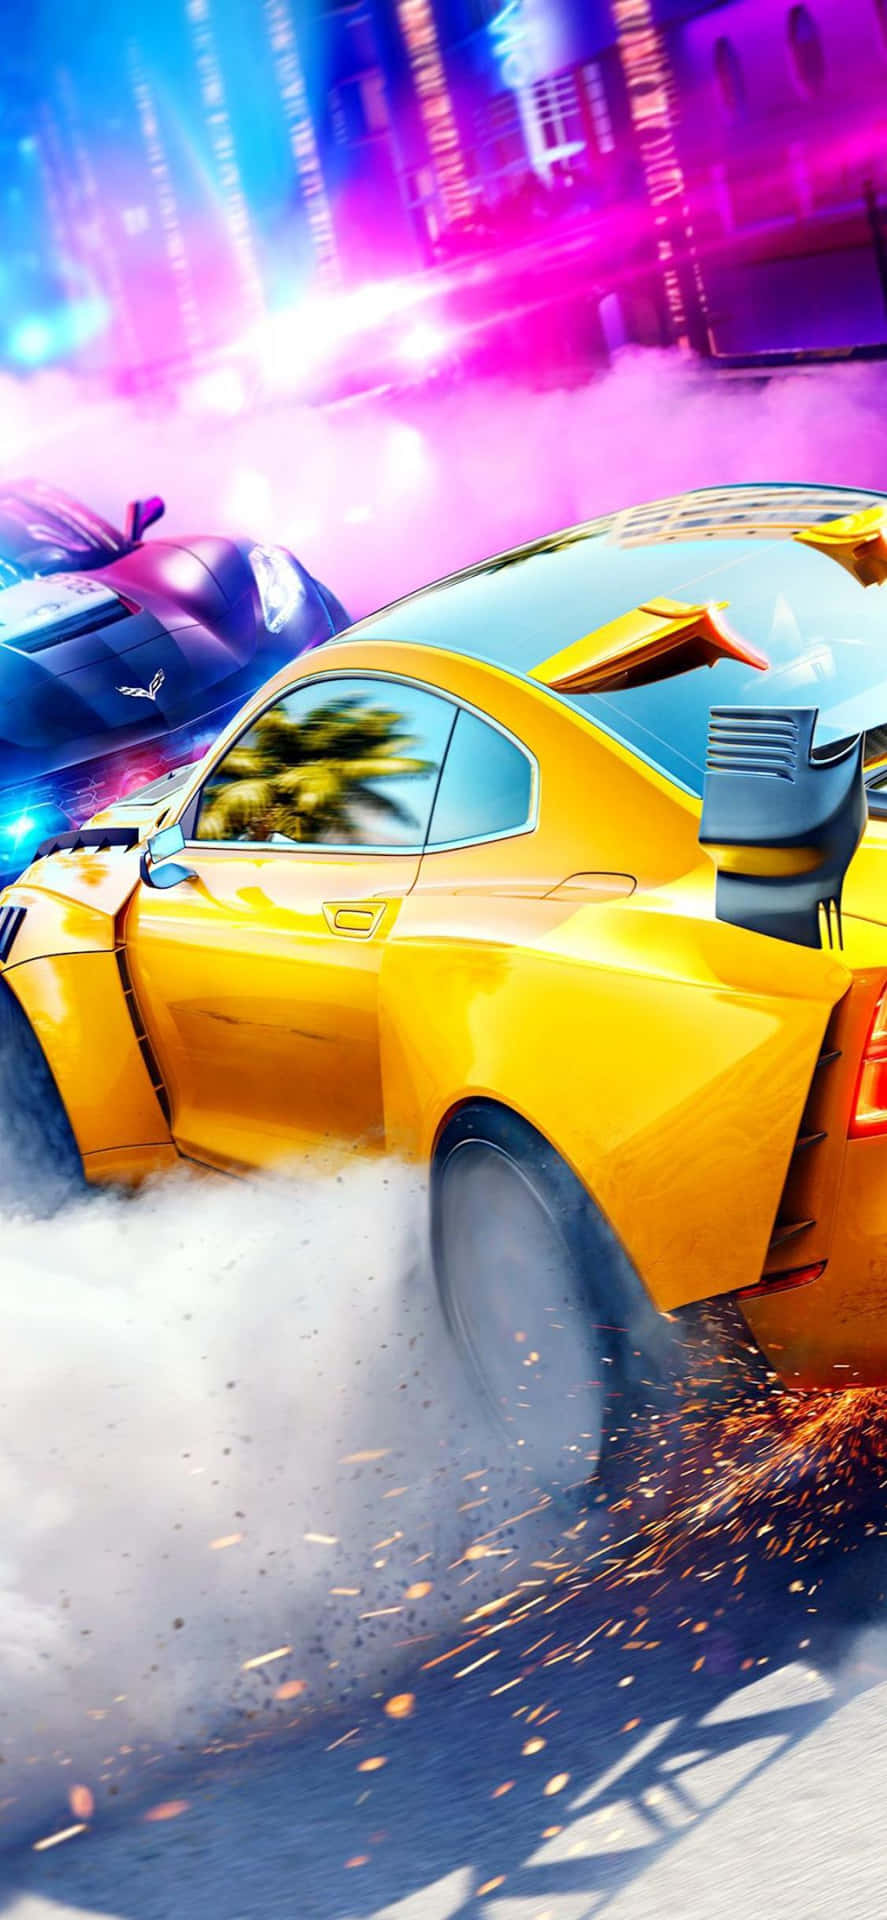 Outrun Your Rivals in Need for Speed Heat on iPhone Xs